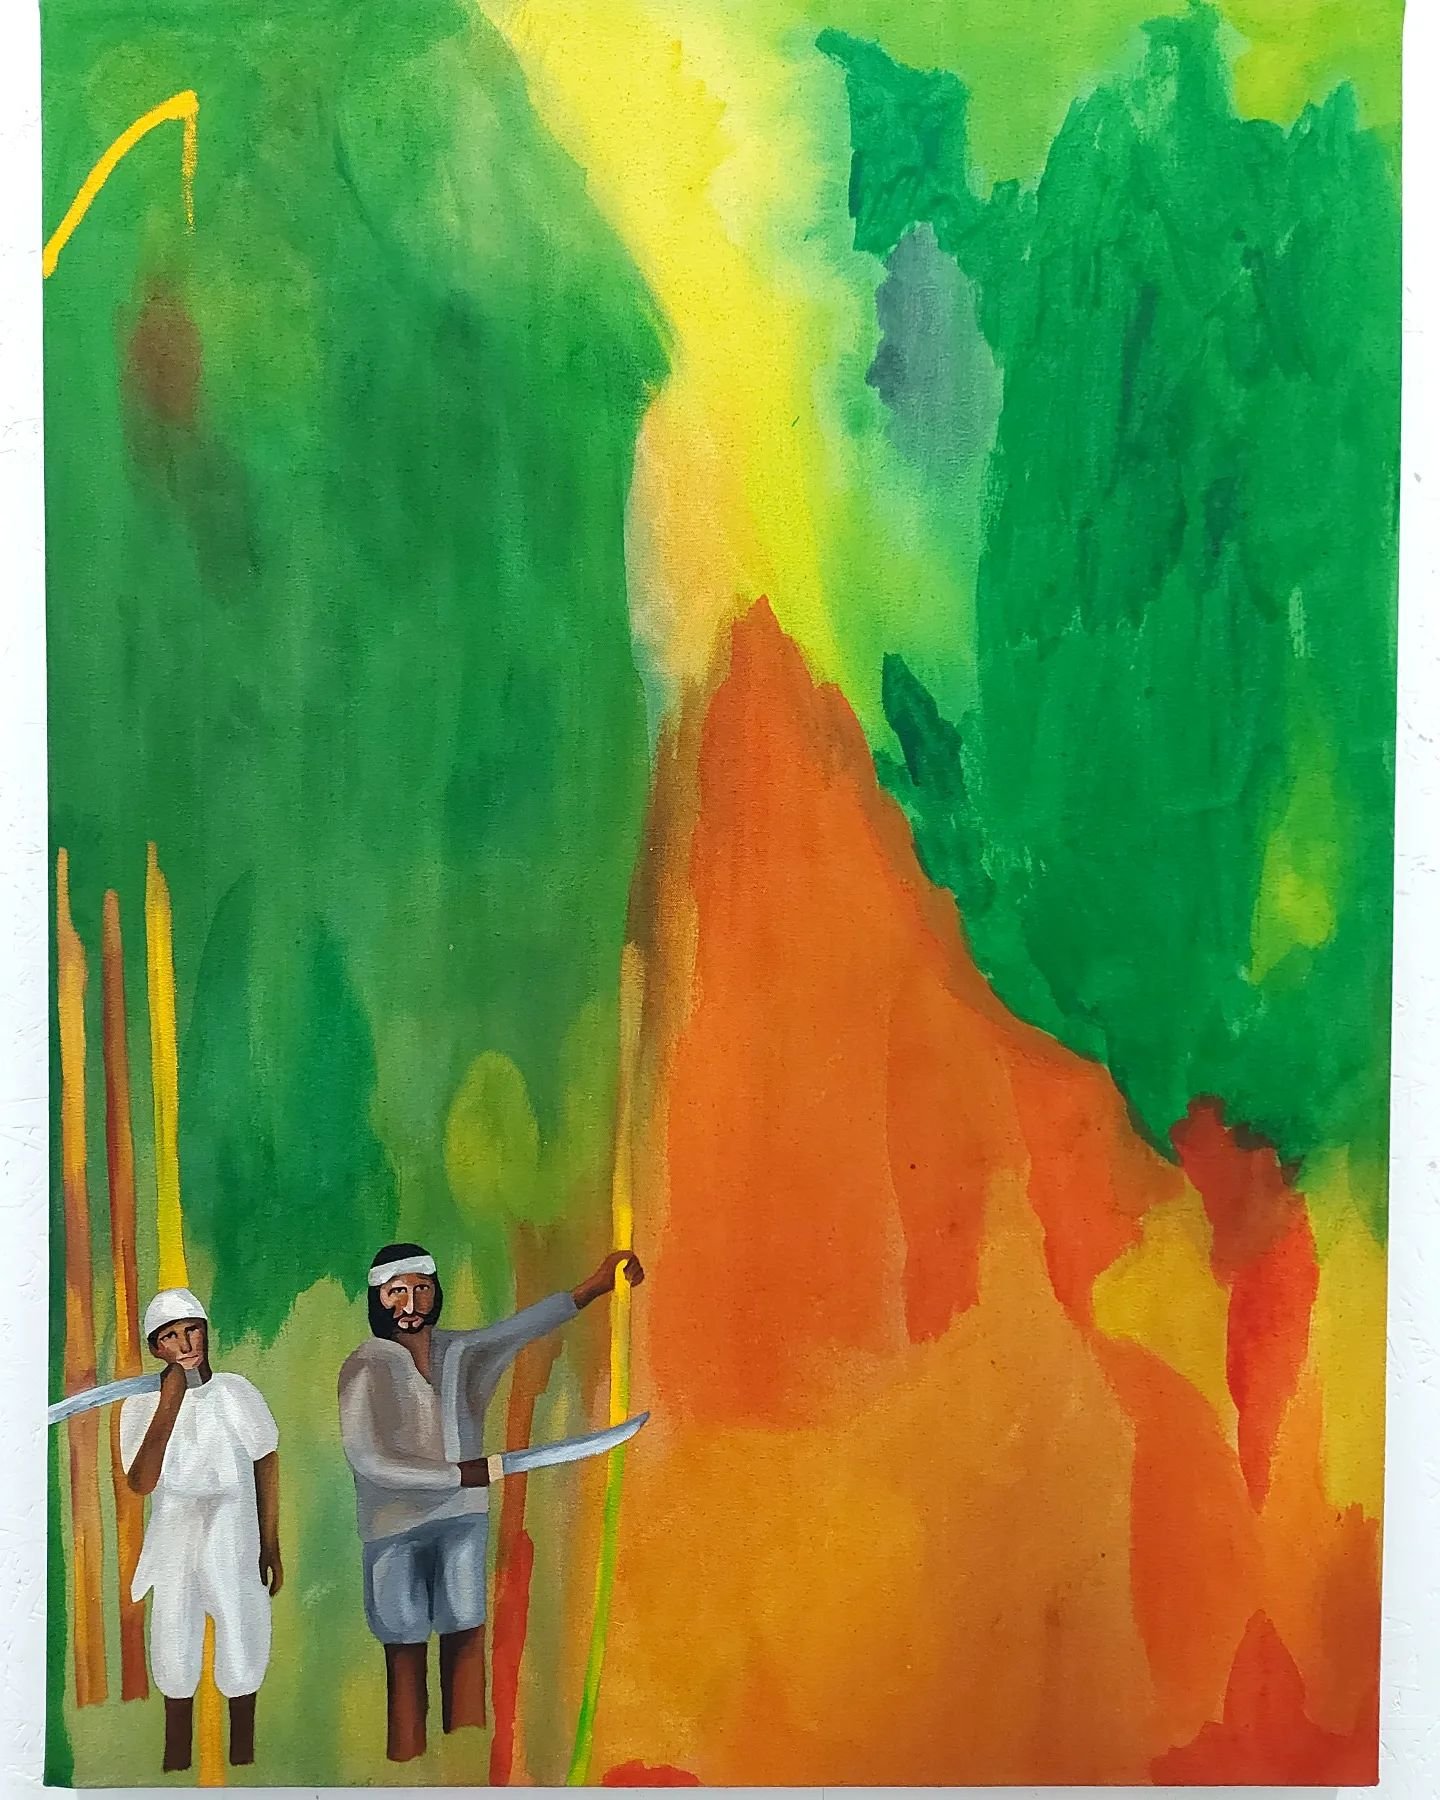 A studio shot of the painting that I am currently working on. This composition, when fully completed, will depict Indian indentured labourers reaping sugar cane using a cutlass, 
an implement that is still used today in India and by those of Indian d